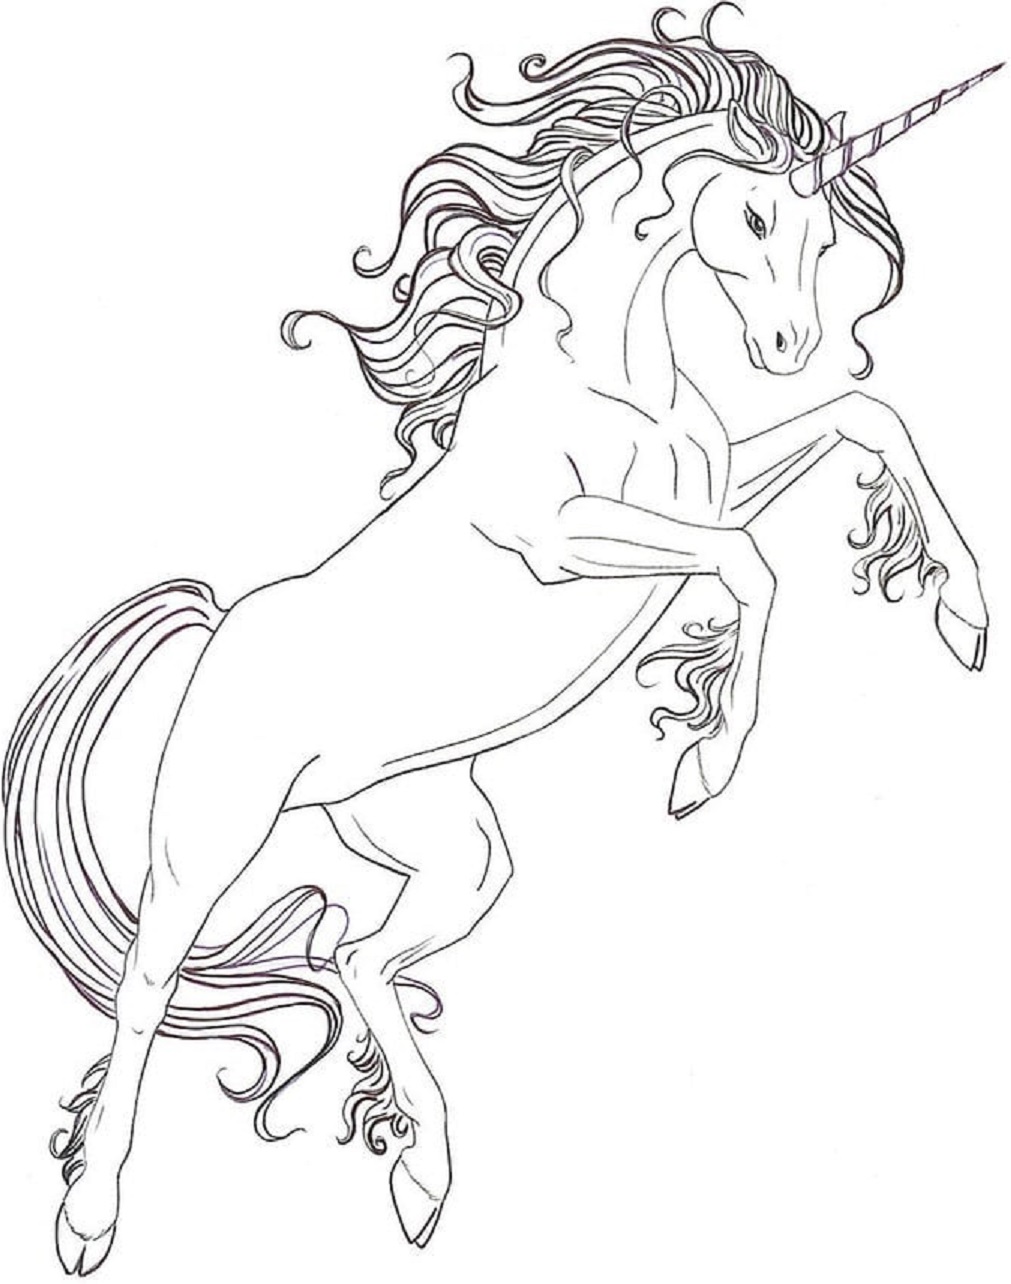 Winged Unicorn Coloring Pages Alicorn - Instituto